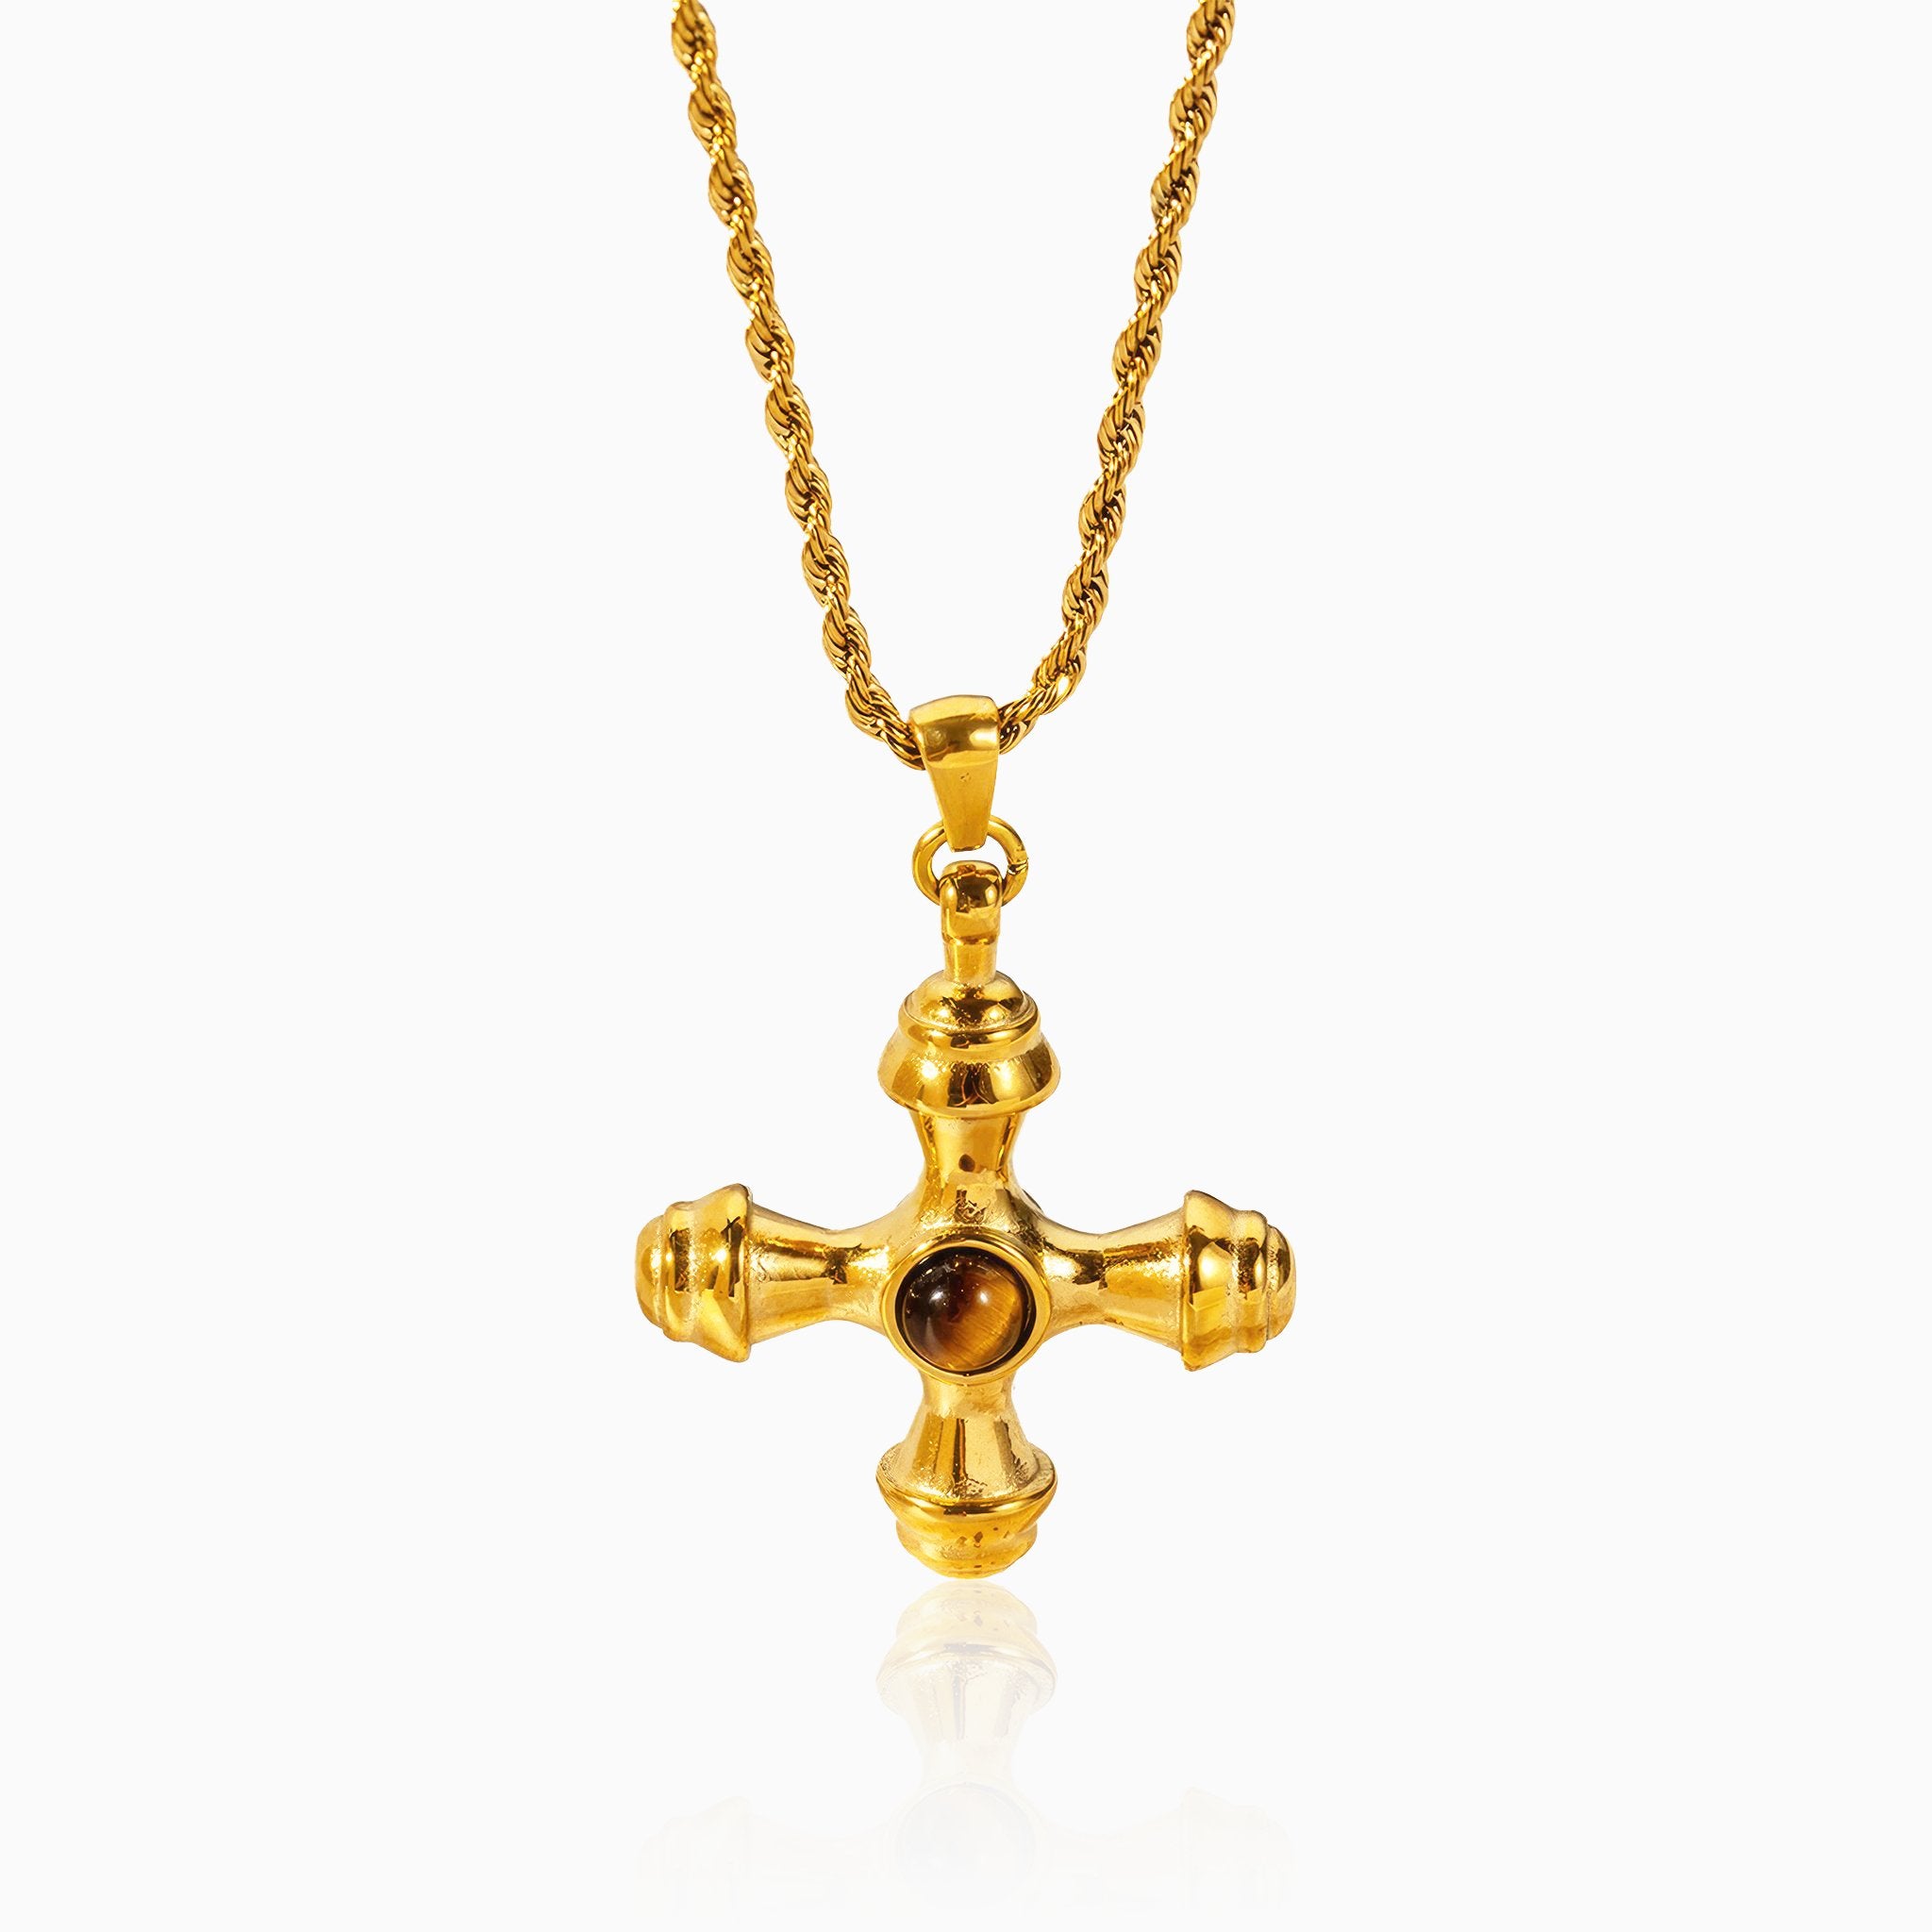 Cross Tiger Eye Necklace - Nobbier - Necklace - 18K Gold And Titanium PVD Coated Jewelry